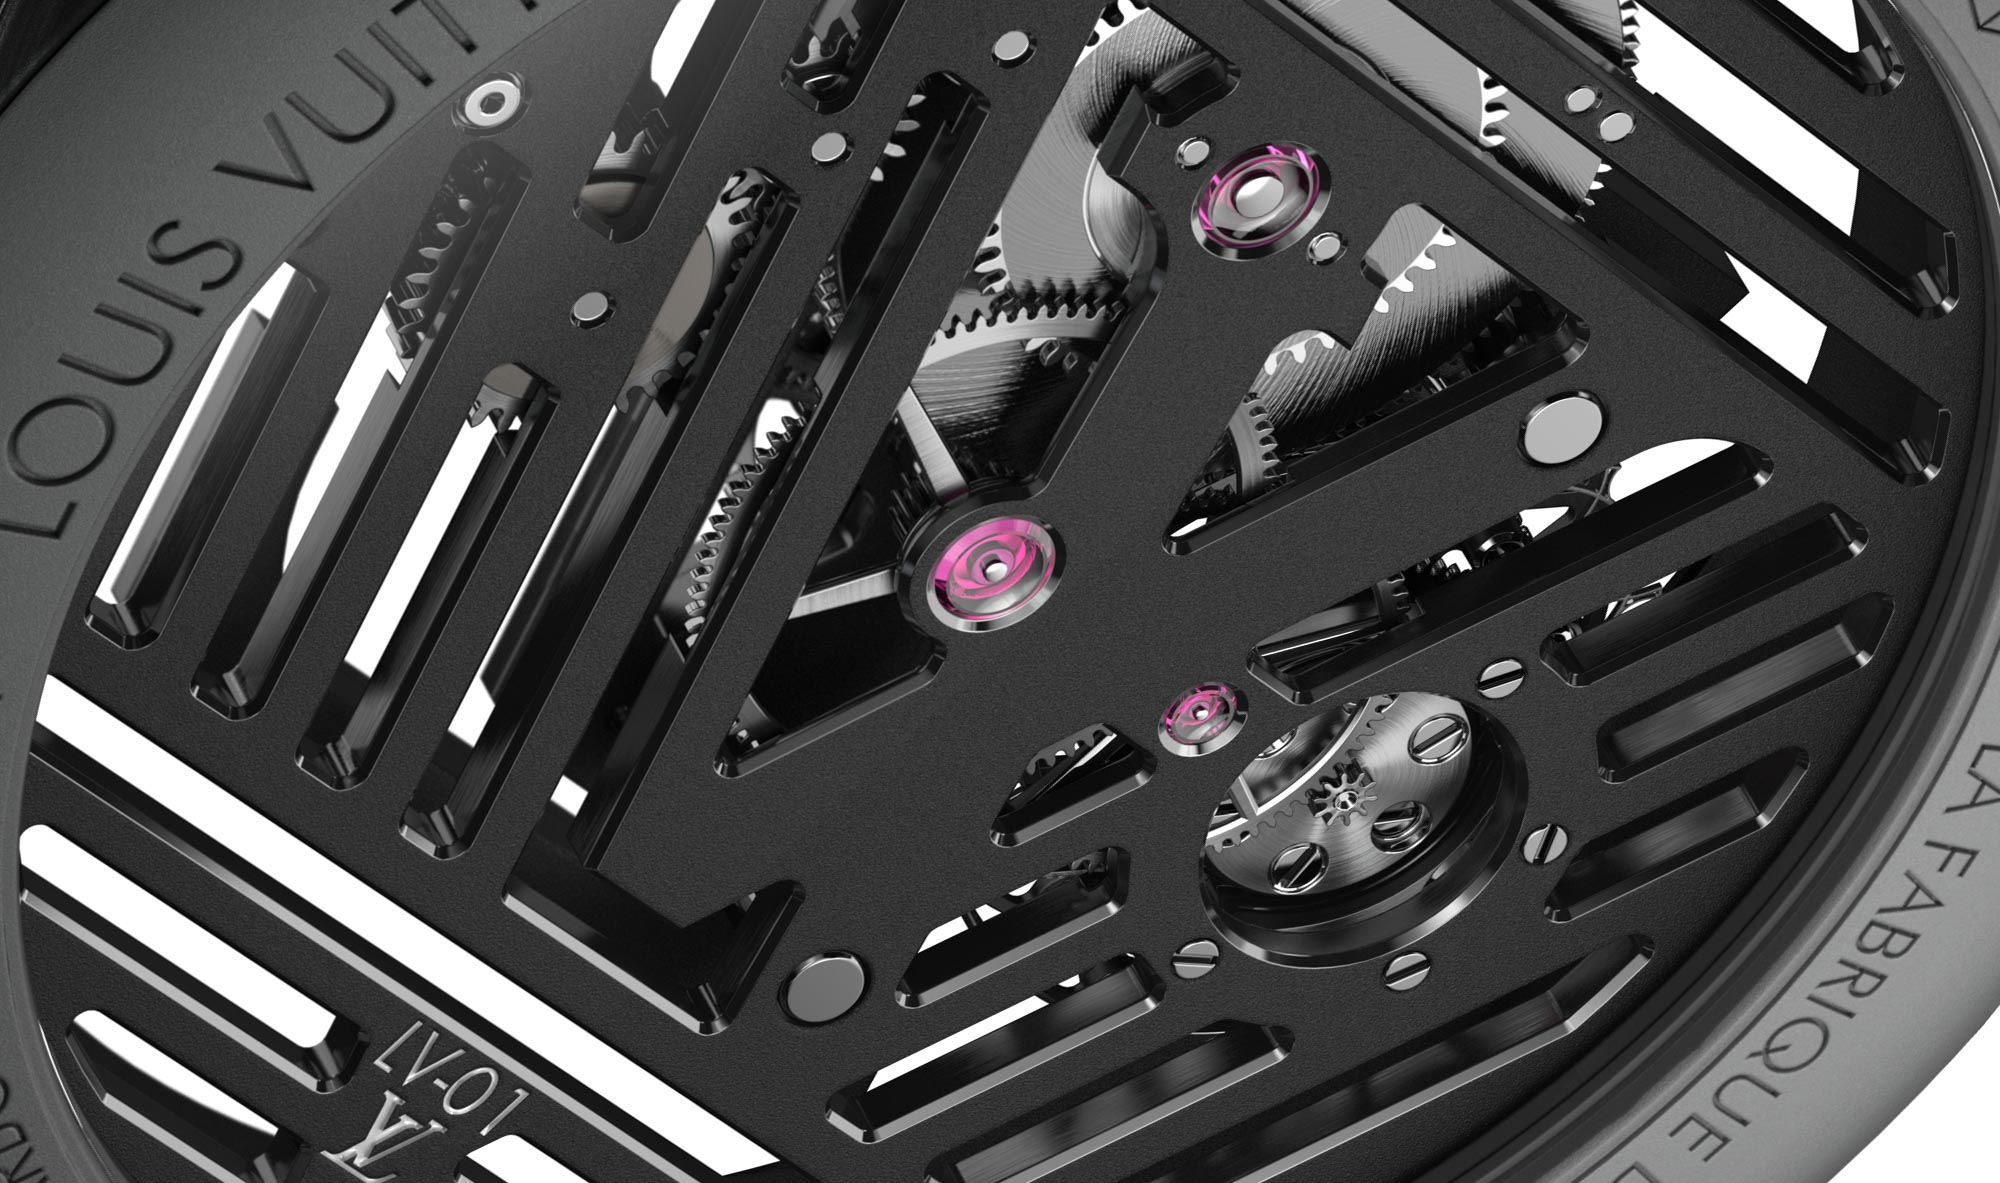 Louis Vuitton uses advanced materials and watchmaking skills in £236,000  Tambour Curve Flying Tourbillon